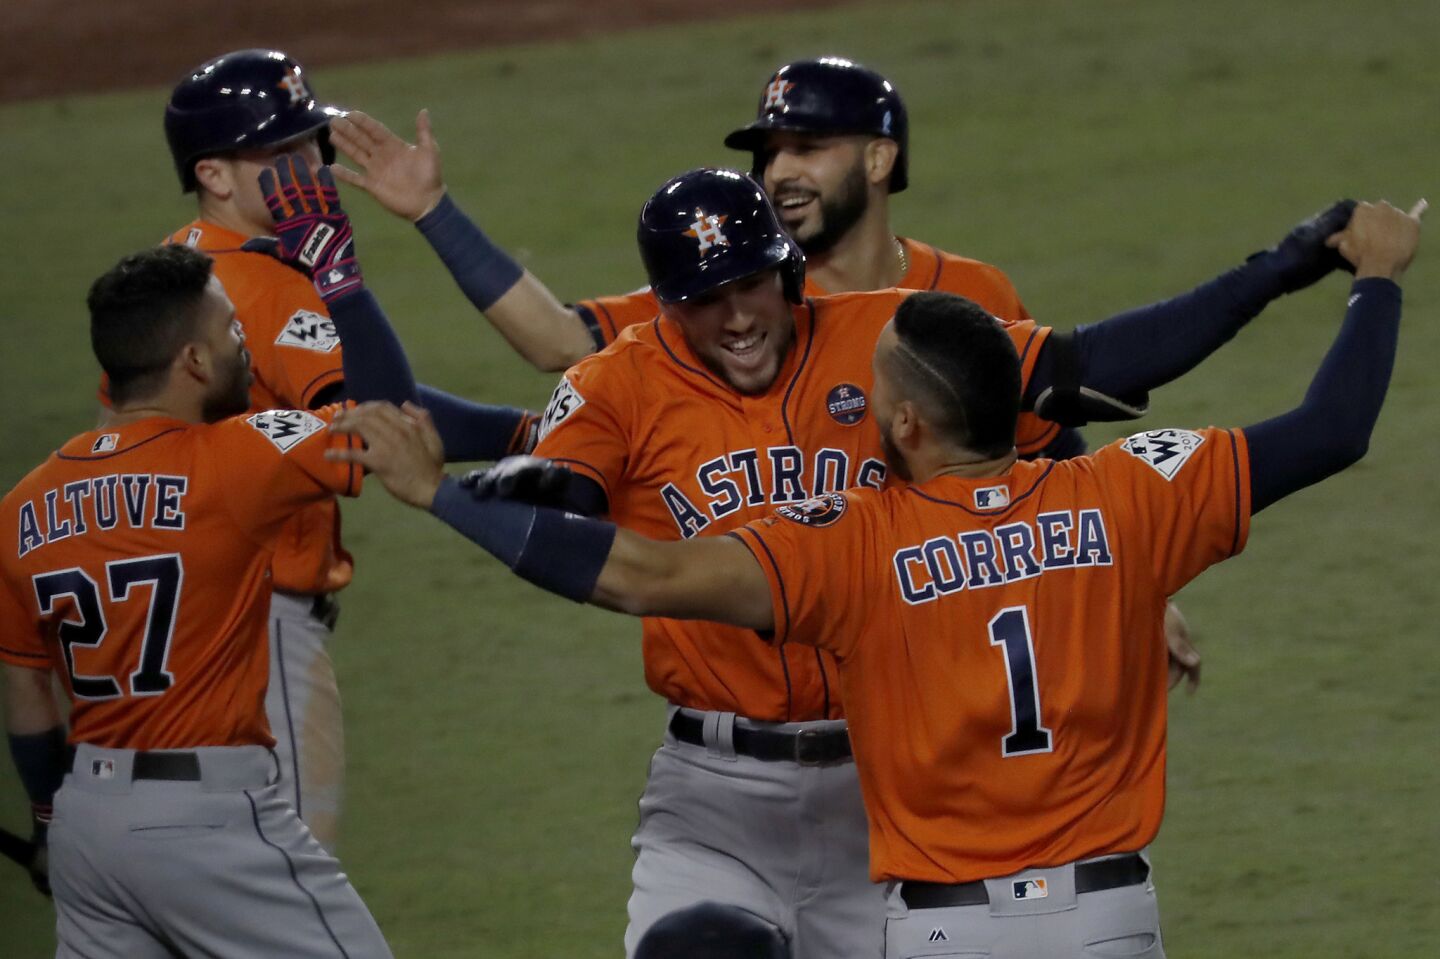 Astros right fielder George Springer, center, celebrates with teammates after hitting a two-run homer against the Dodgers in the second inning.